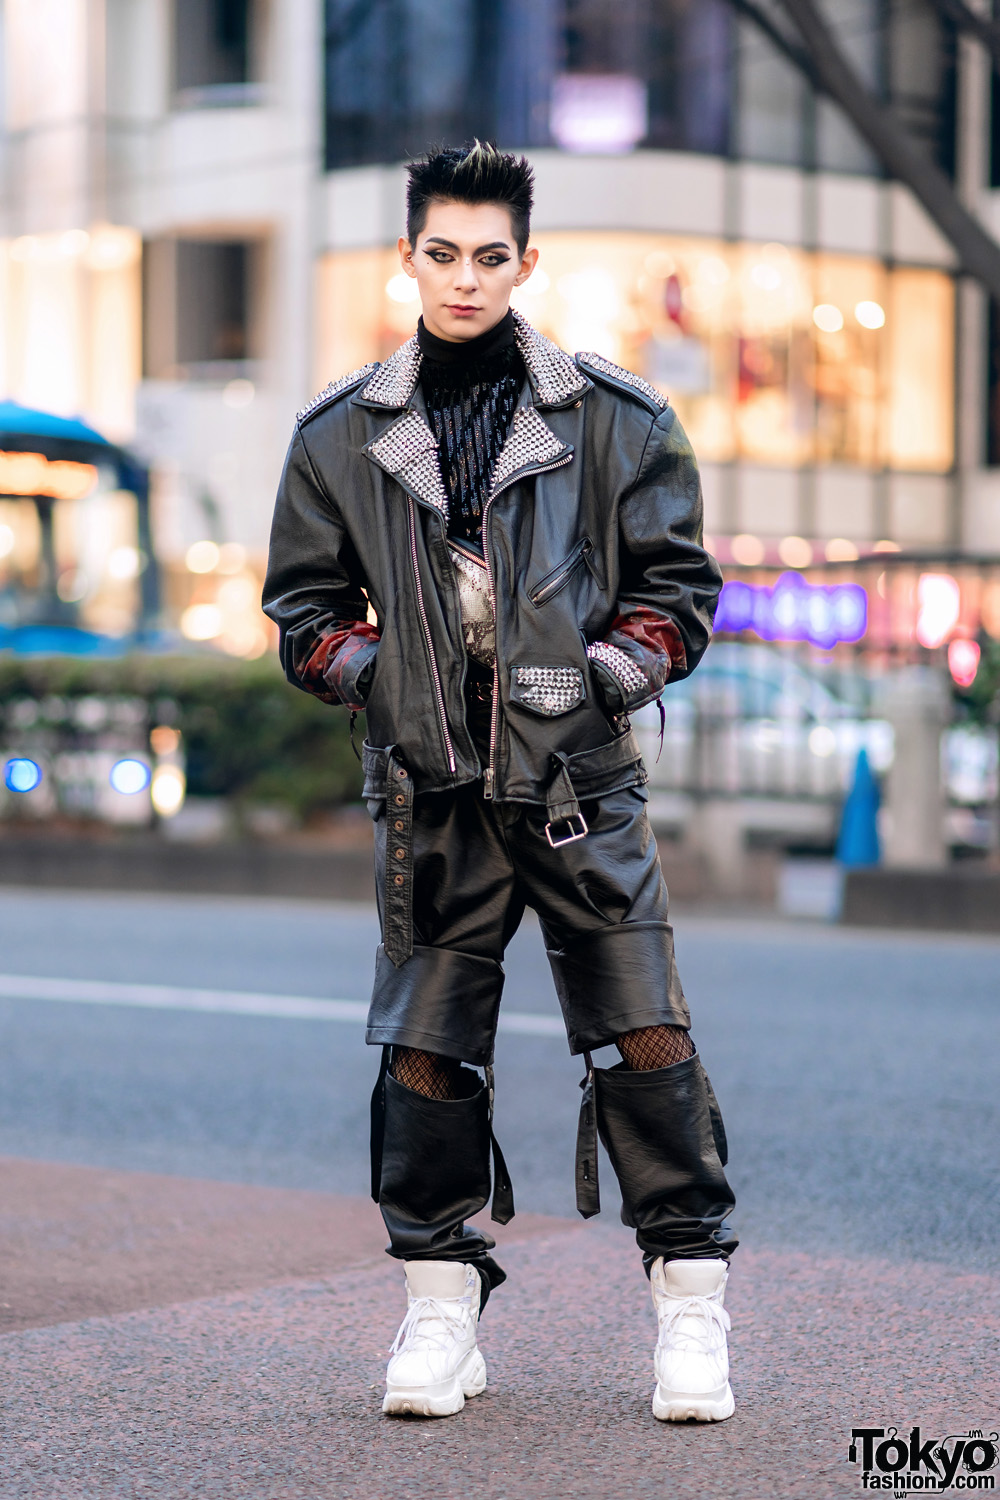 Leather Harajuku Street Style w/ Spiked Motorcycle Jacket, Gallerie ...